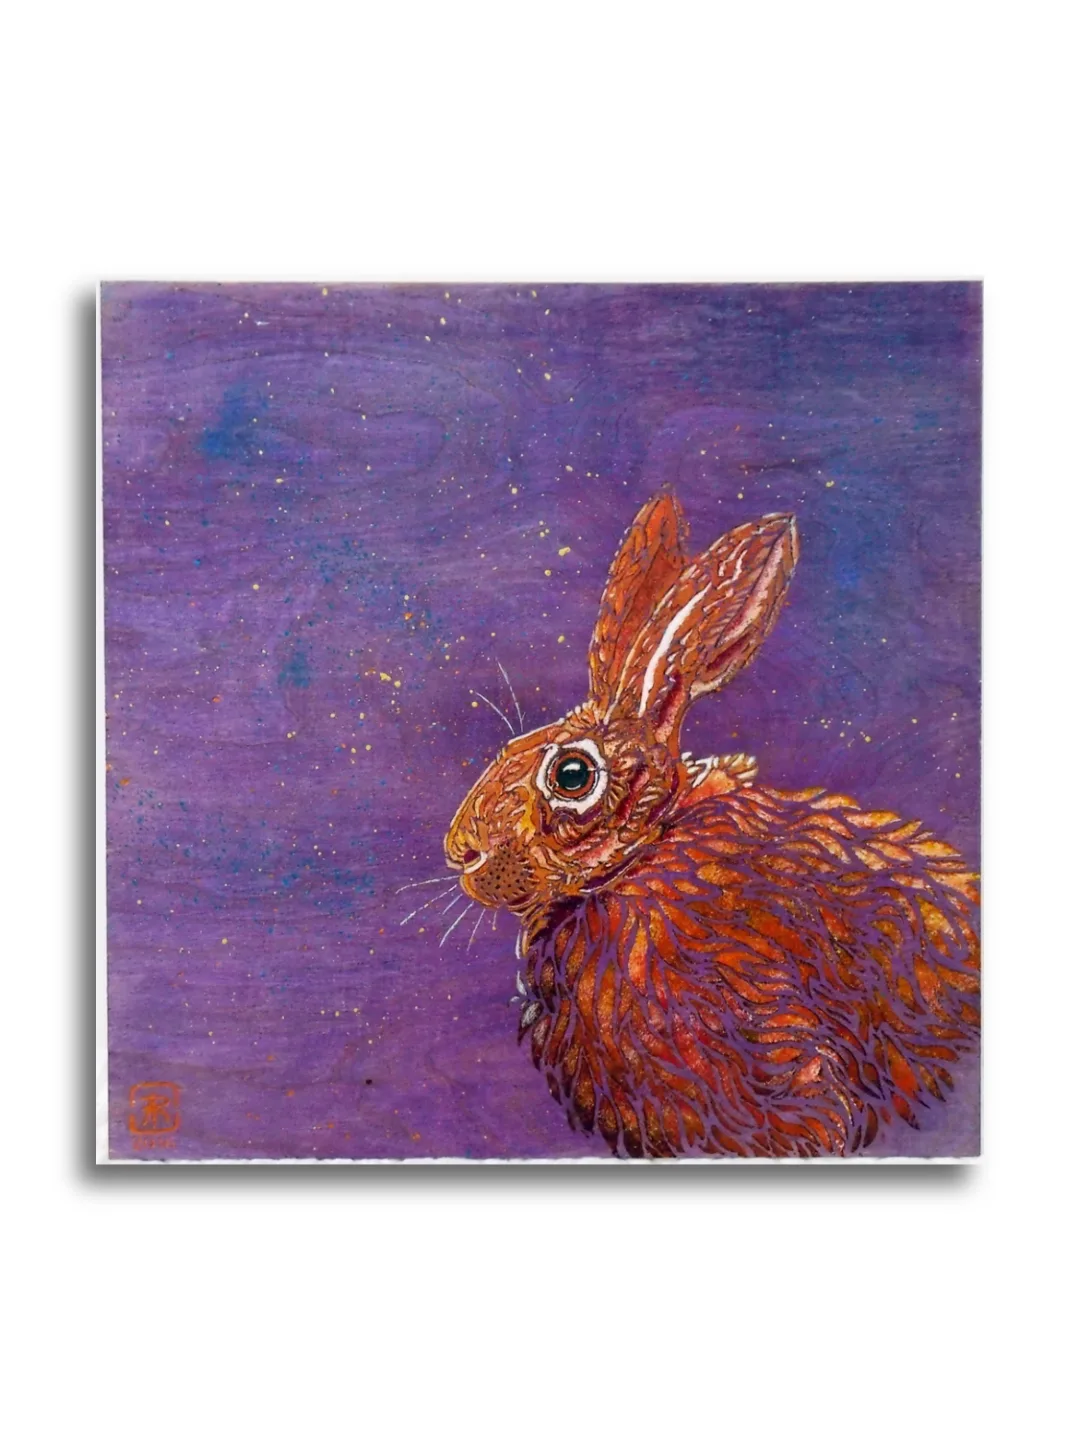 Sitting Hare #3 by Ann Richmond - A stunning, Original stencilled artwork featuring a Hare. Painted in the artist's unique style... Framing available.